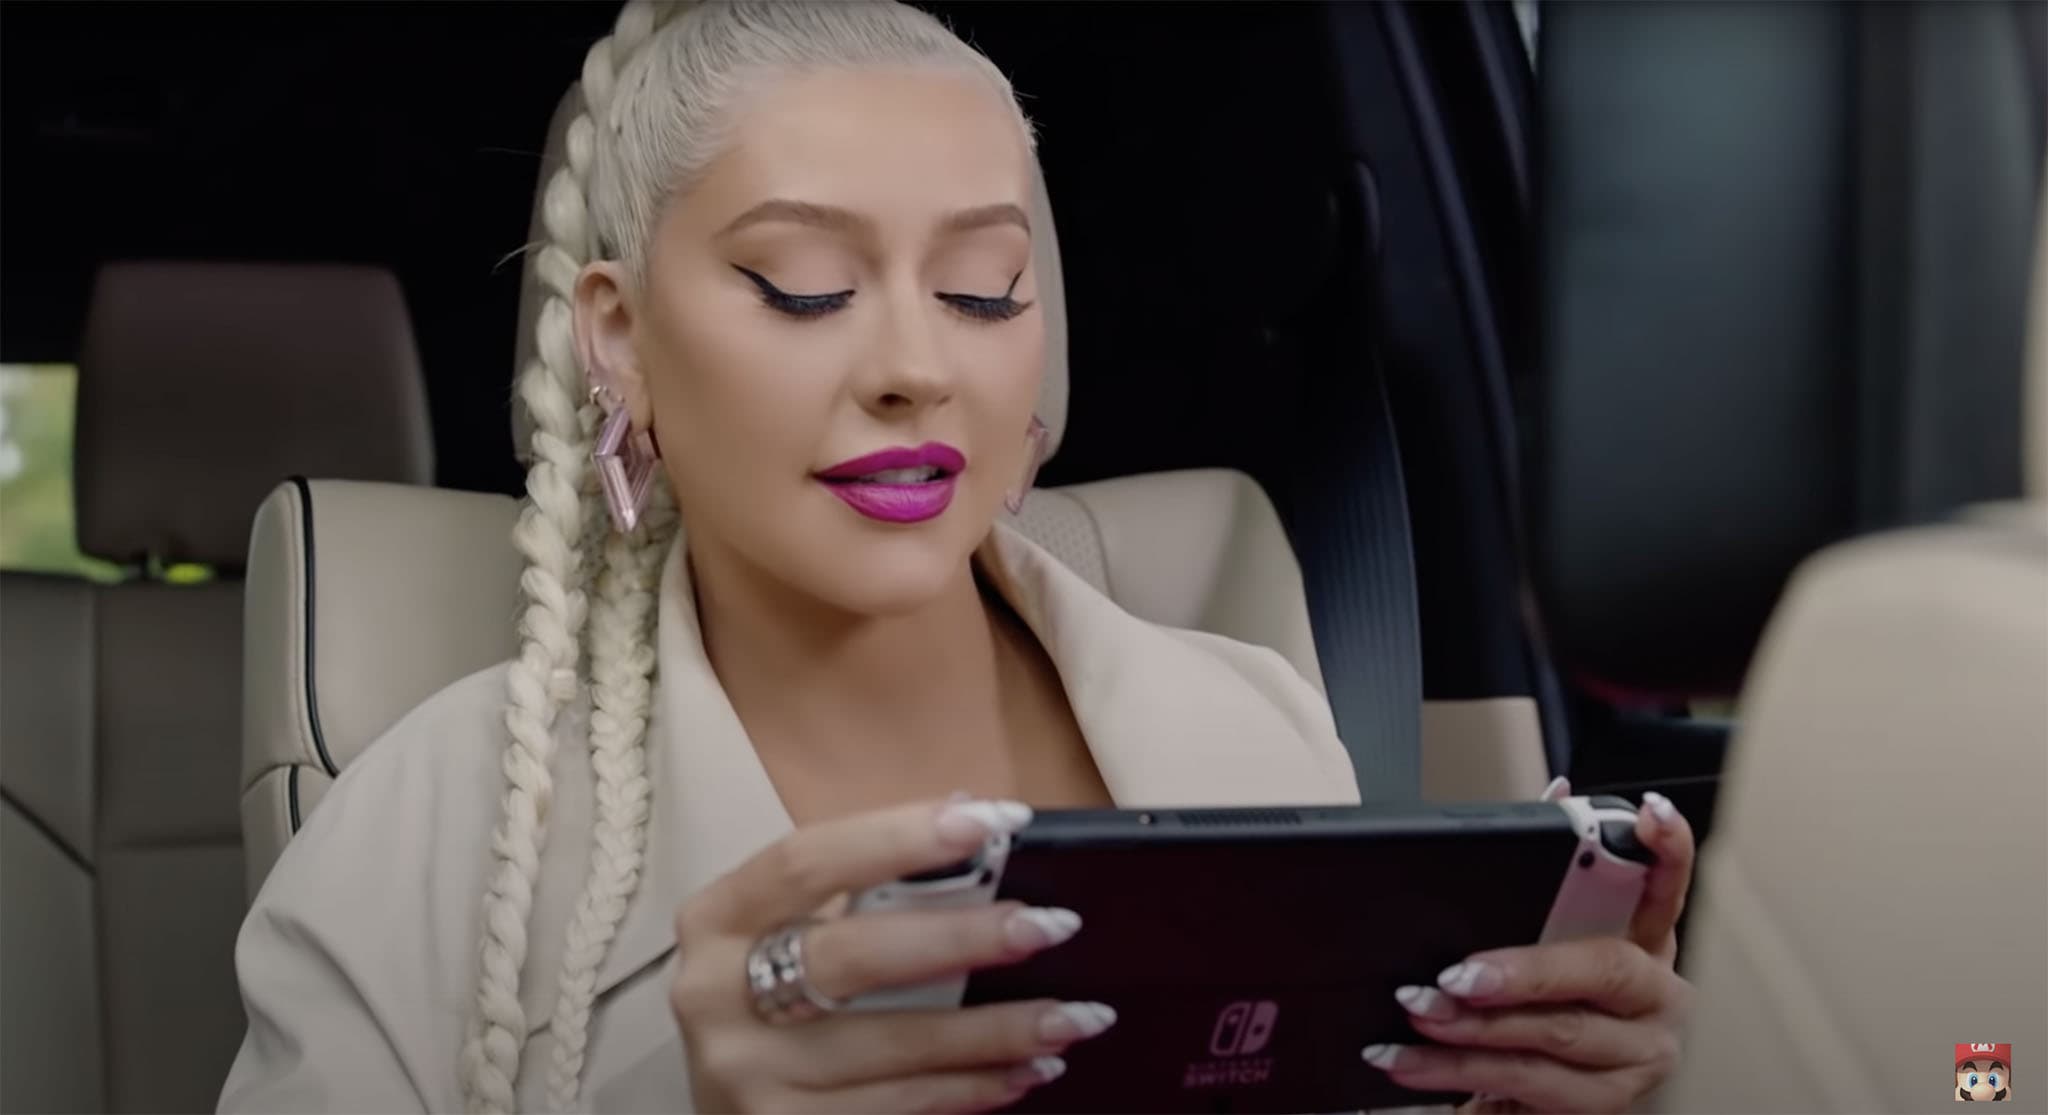 Christina Aguilera is seen playing Animal Crossing: New Horizons on her way home in the commercial